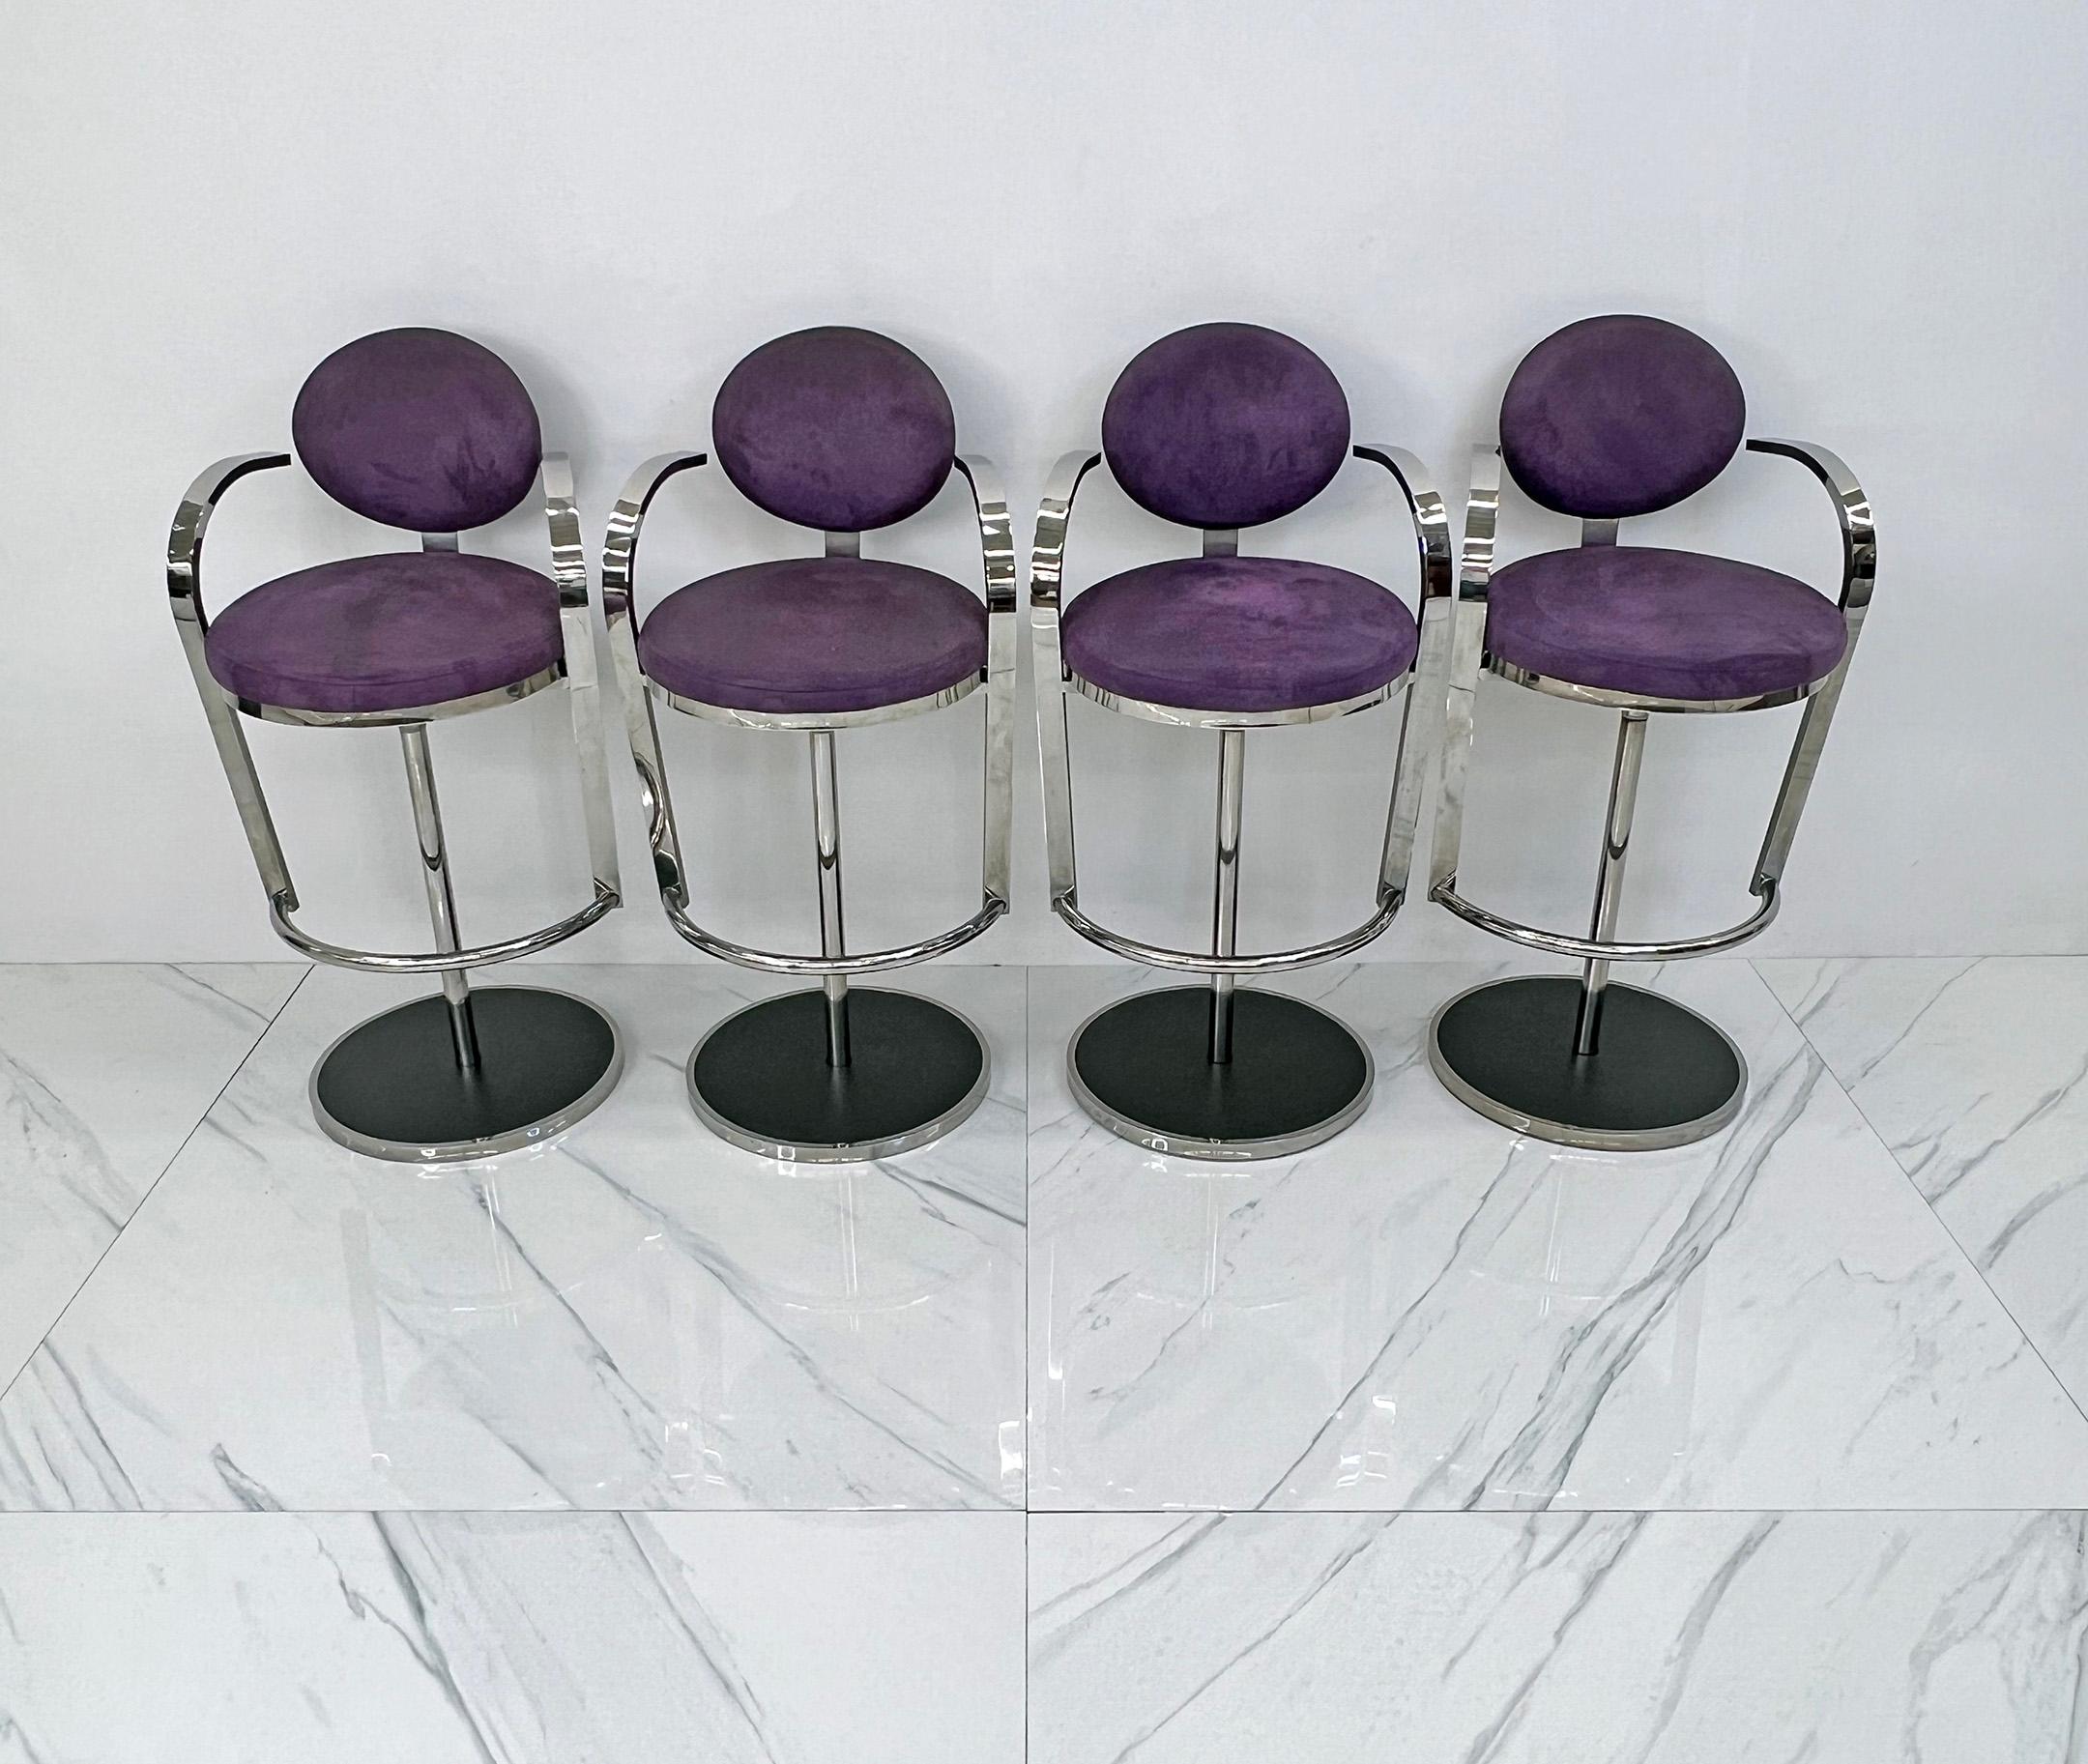 Available right now, we have a set of four fabulous bar stools straight from the creative minds at the Design Institute of America! These sleek and stylish stools are a vibrant throwback from the late 1980s or early 1990s, embracing the post-modern